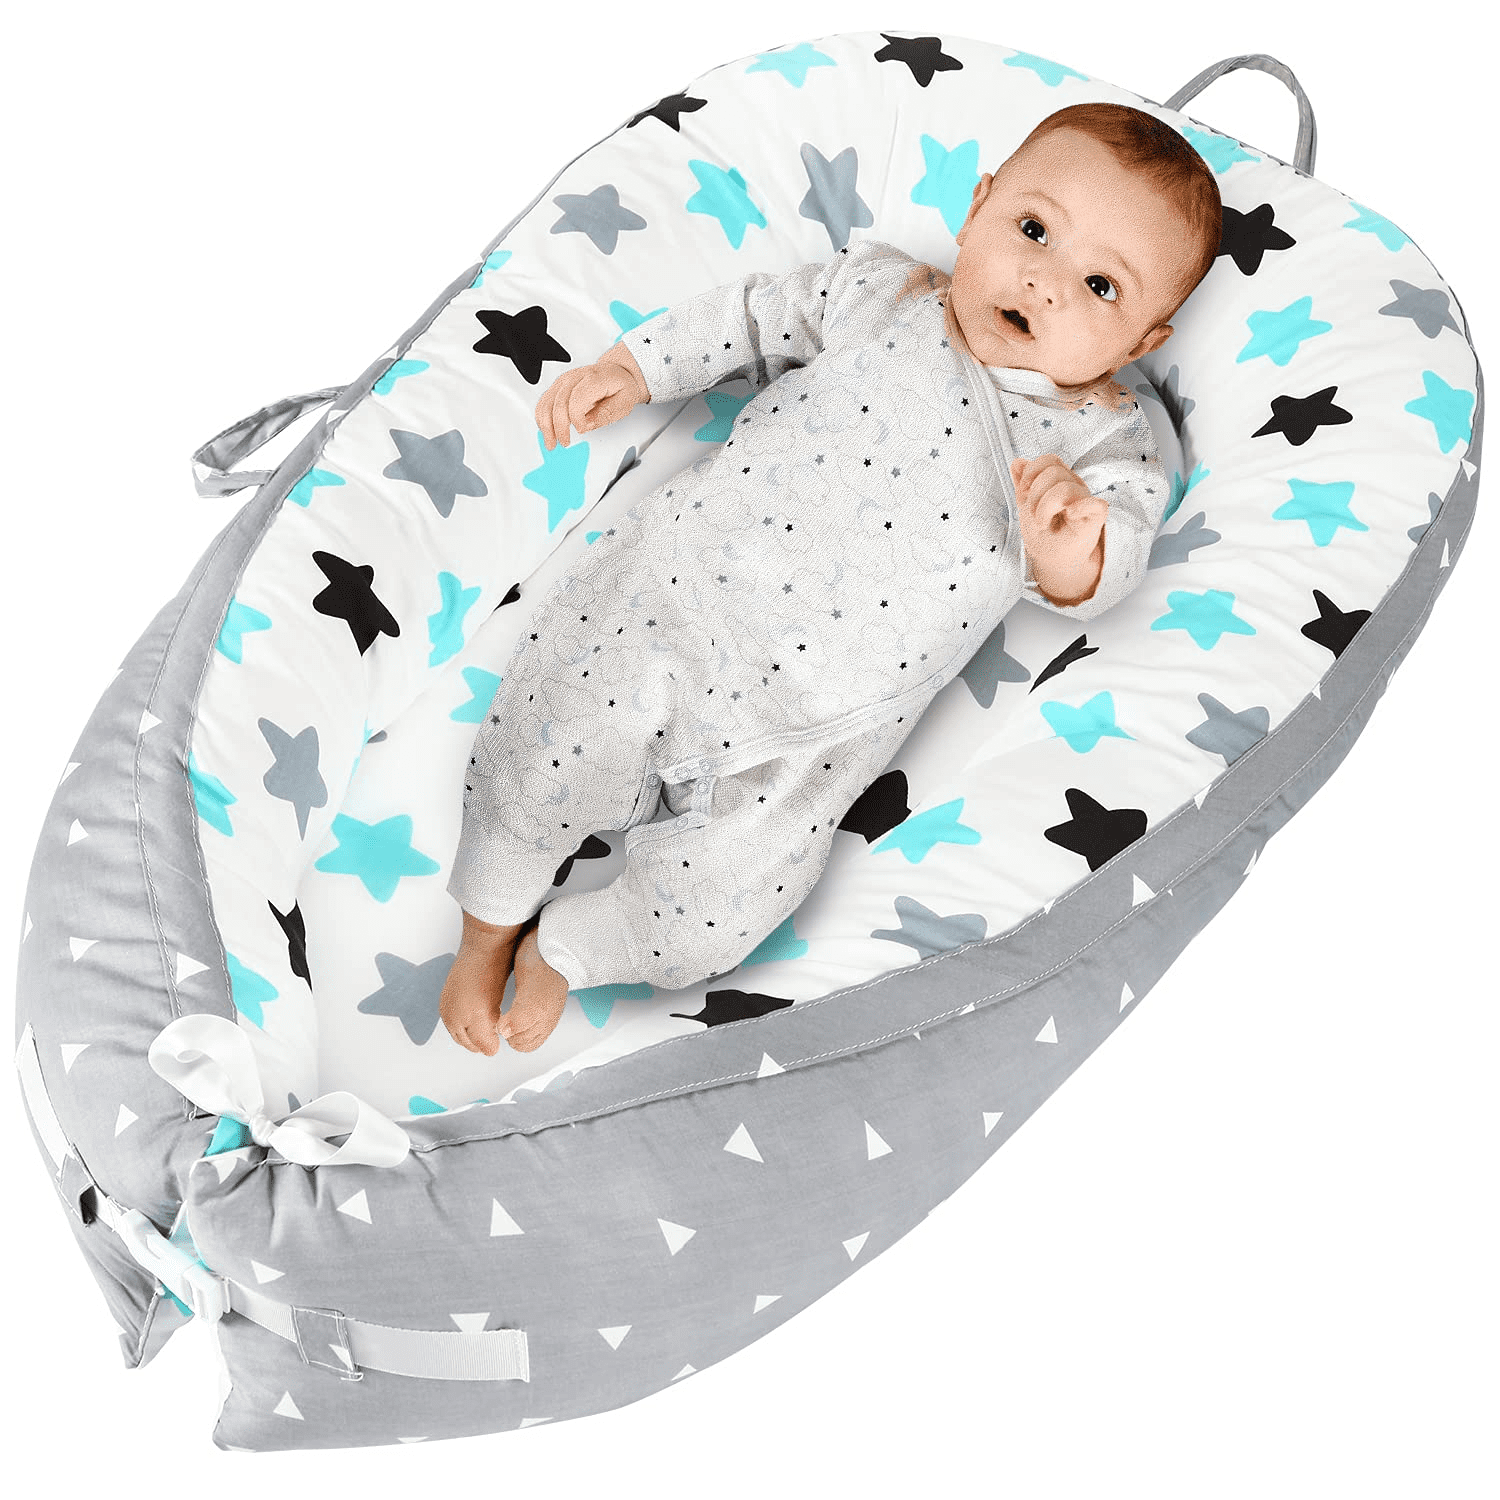 A3,35x19x6inch Newborn Infant Bassinet Portable Baby Nest Snuggle Bed for Newborn Cotton Crib Mattress Baby Sleeping Nest Pillow Bed for Bedroom Travel BELUPAI Baby Lounger Baby Nest Cover 